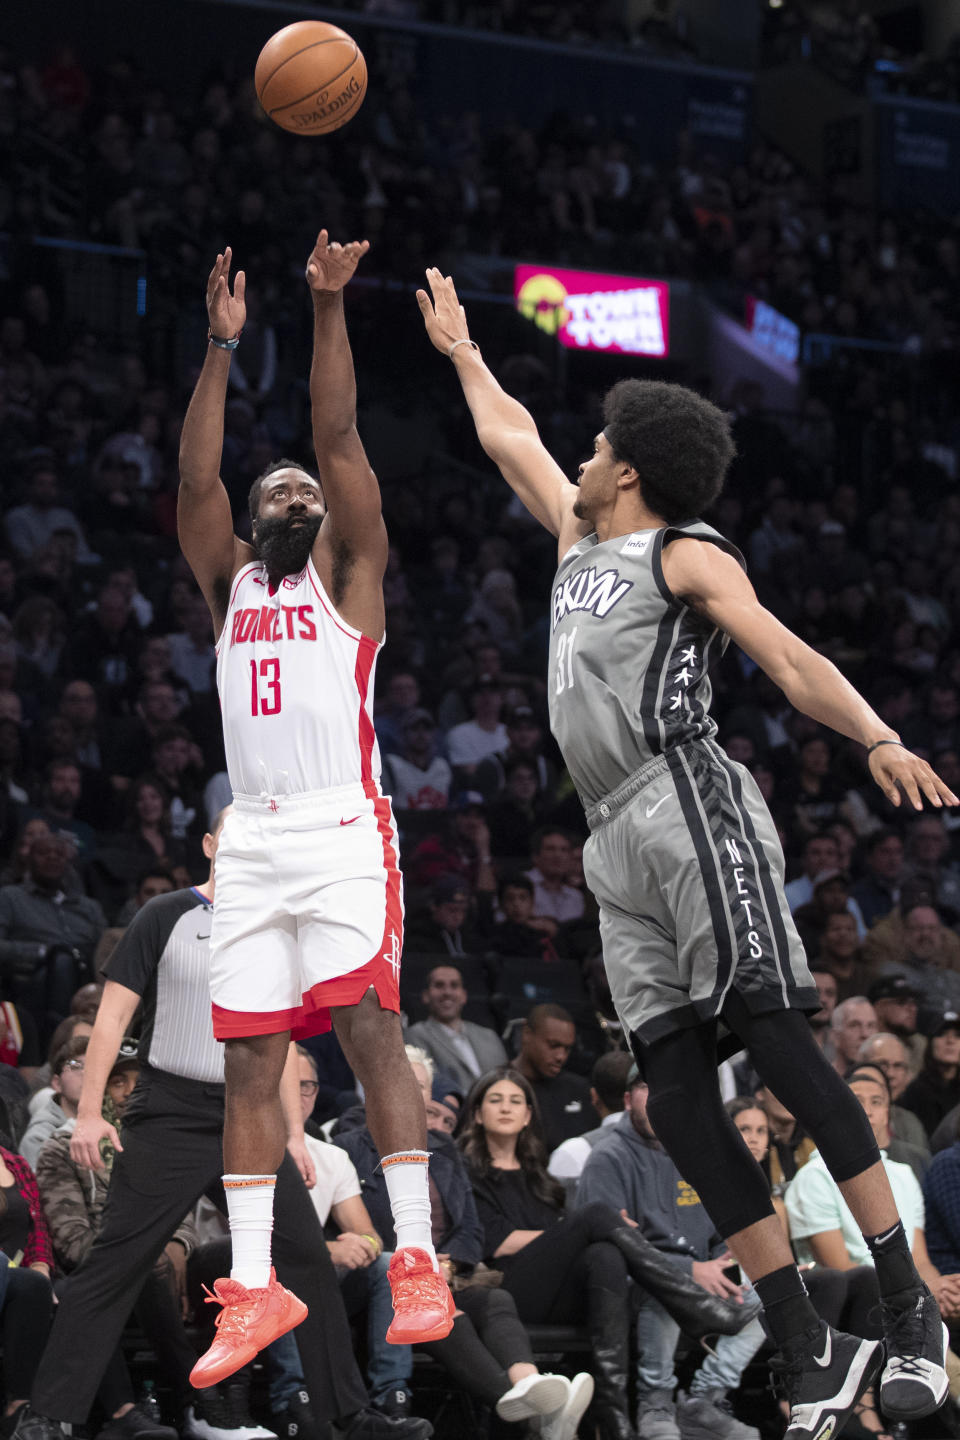 Houston Rockets guard James Harden (13) shoots a 3-pointer past Brooklyn Nets center Jarrett Allen during the first half of an NBA basketball game Friday, Nov. 1, 2019, in New York. (AP Photo/Mary Altaffer)